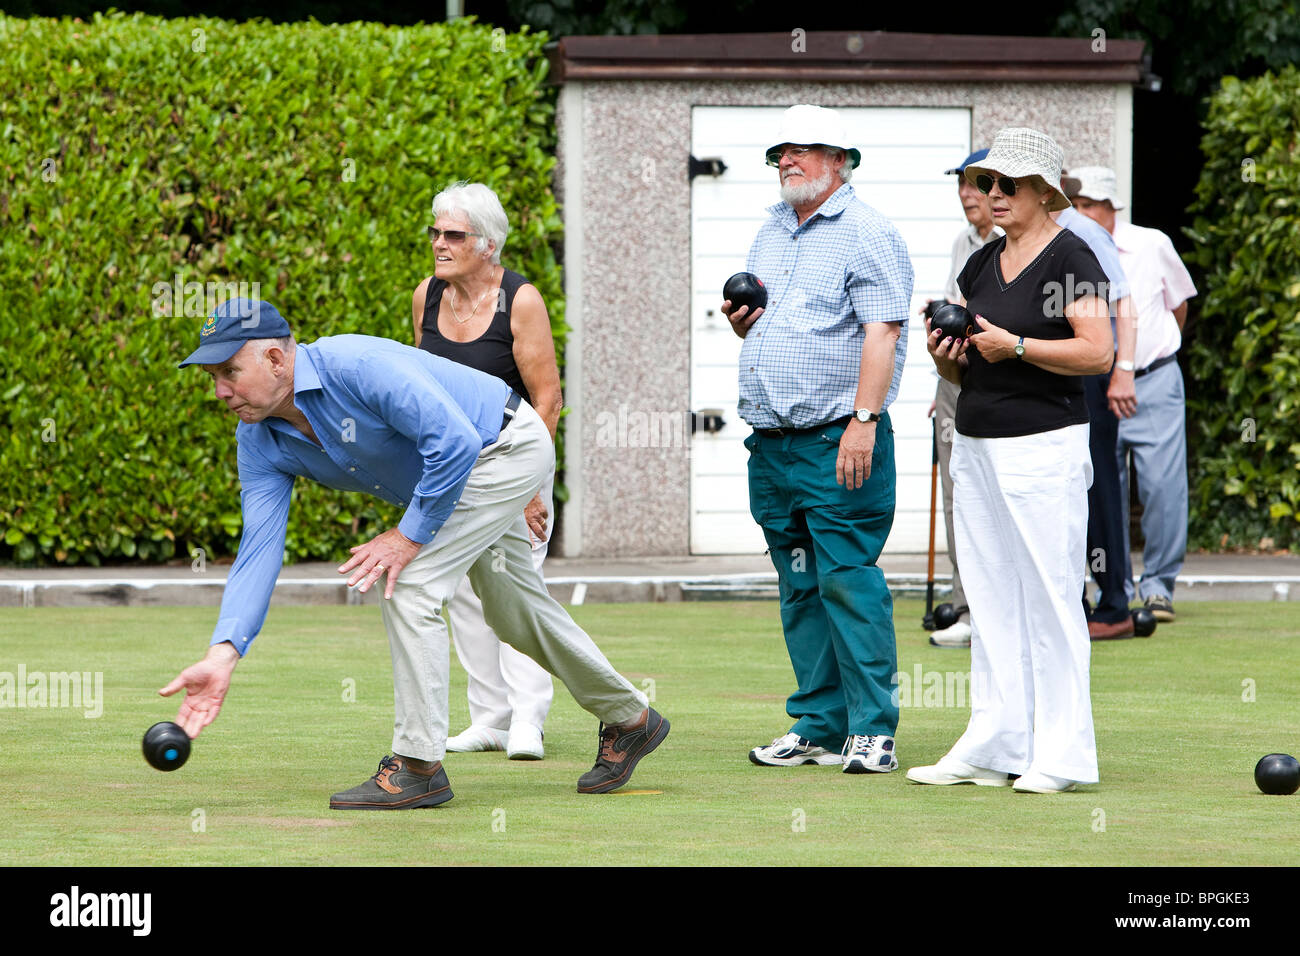 Crown Green Bowling game in Derbyshire Stock Photo